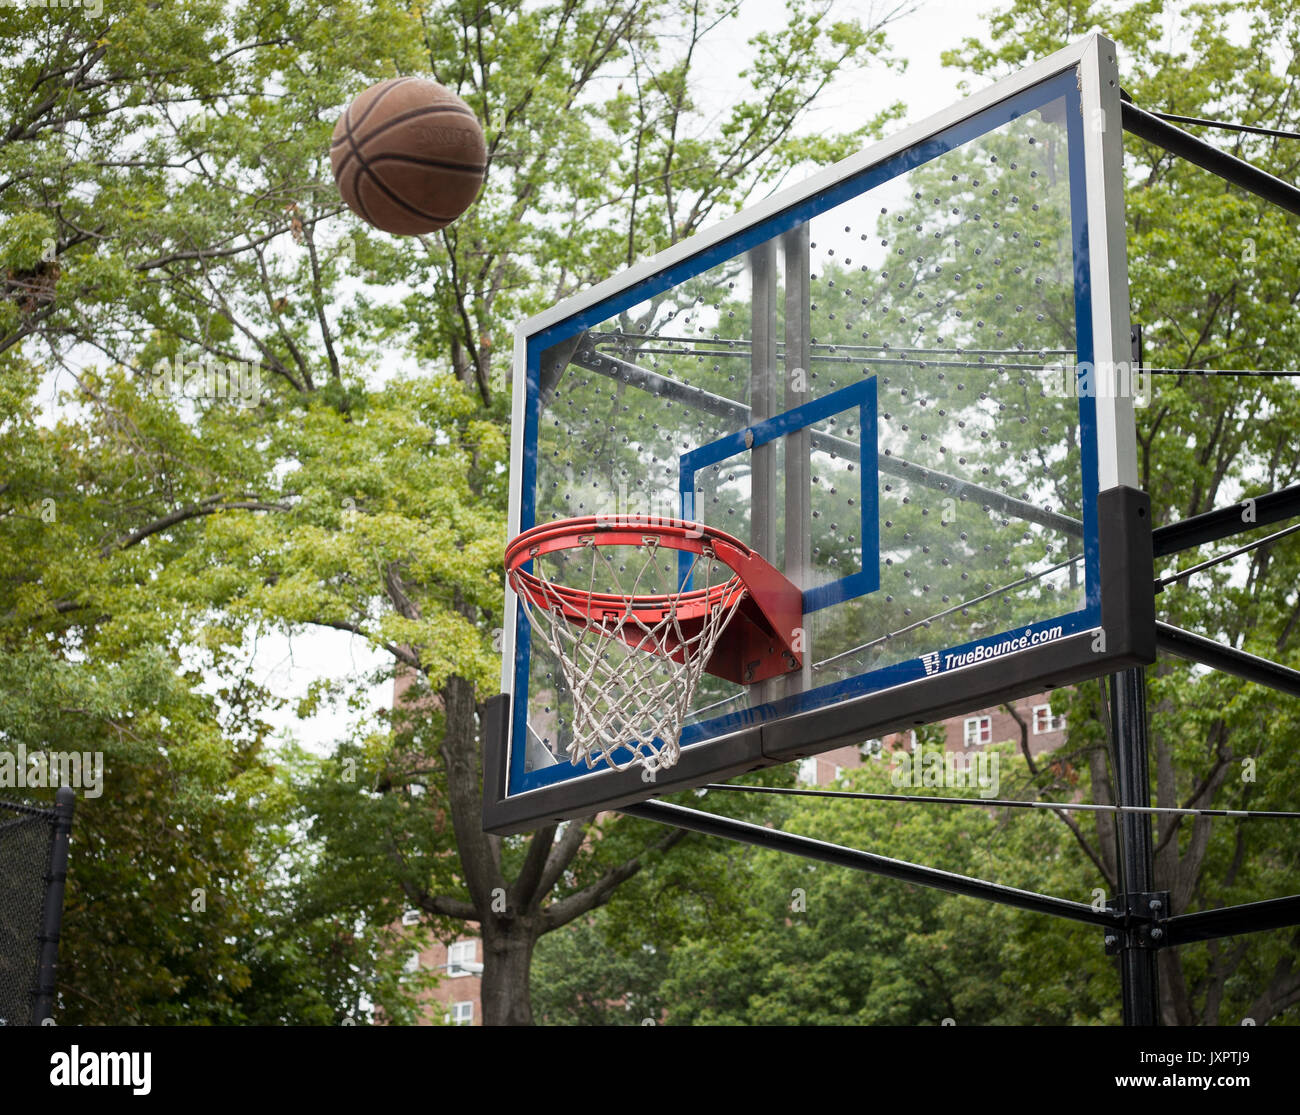 An NBA regulation basketball arcs towards the hoop in a pickup game on a playground. Stock Photo